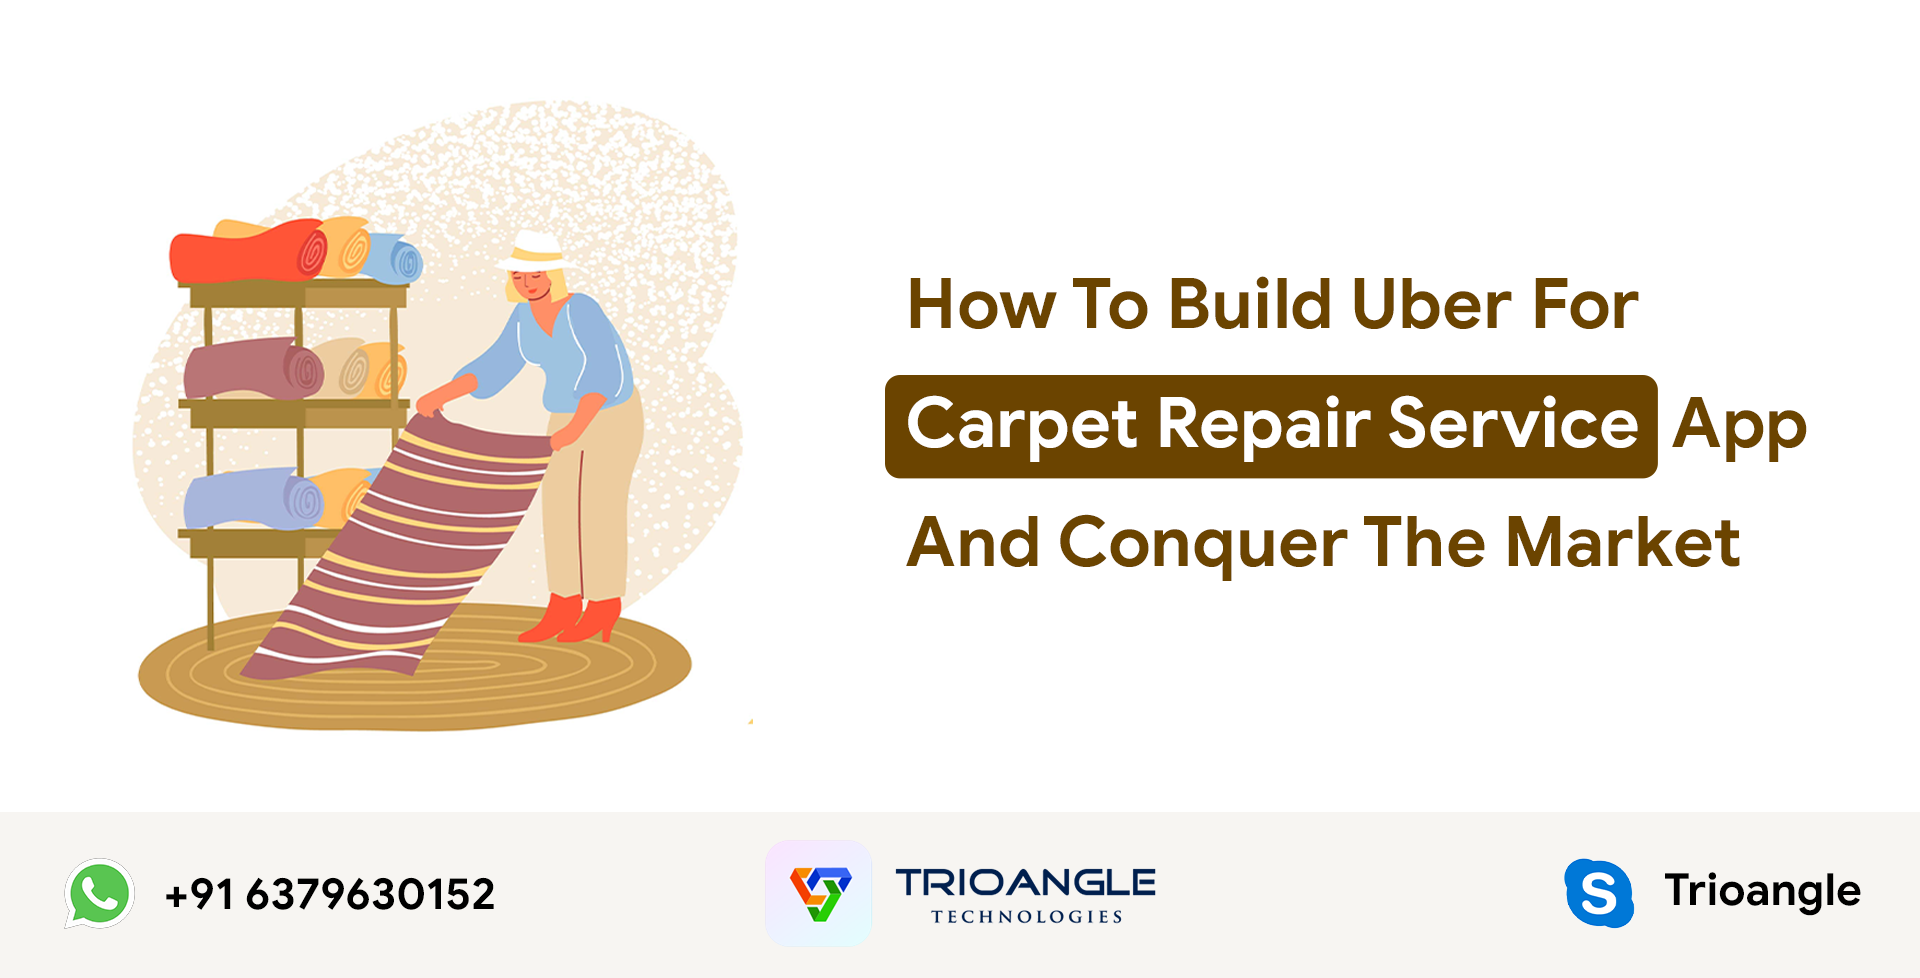 Article about How To Build Uber For Carpet Repair Service App And Conquer The Market